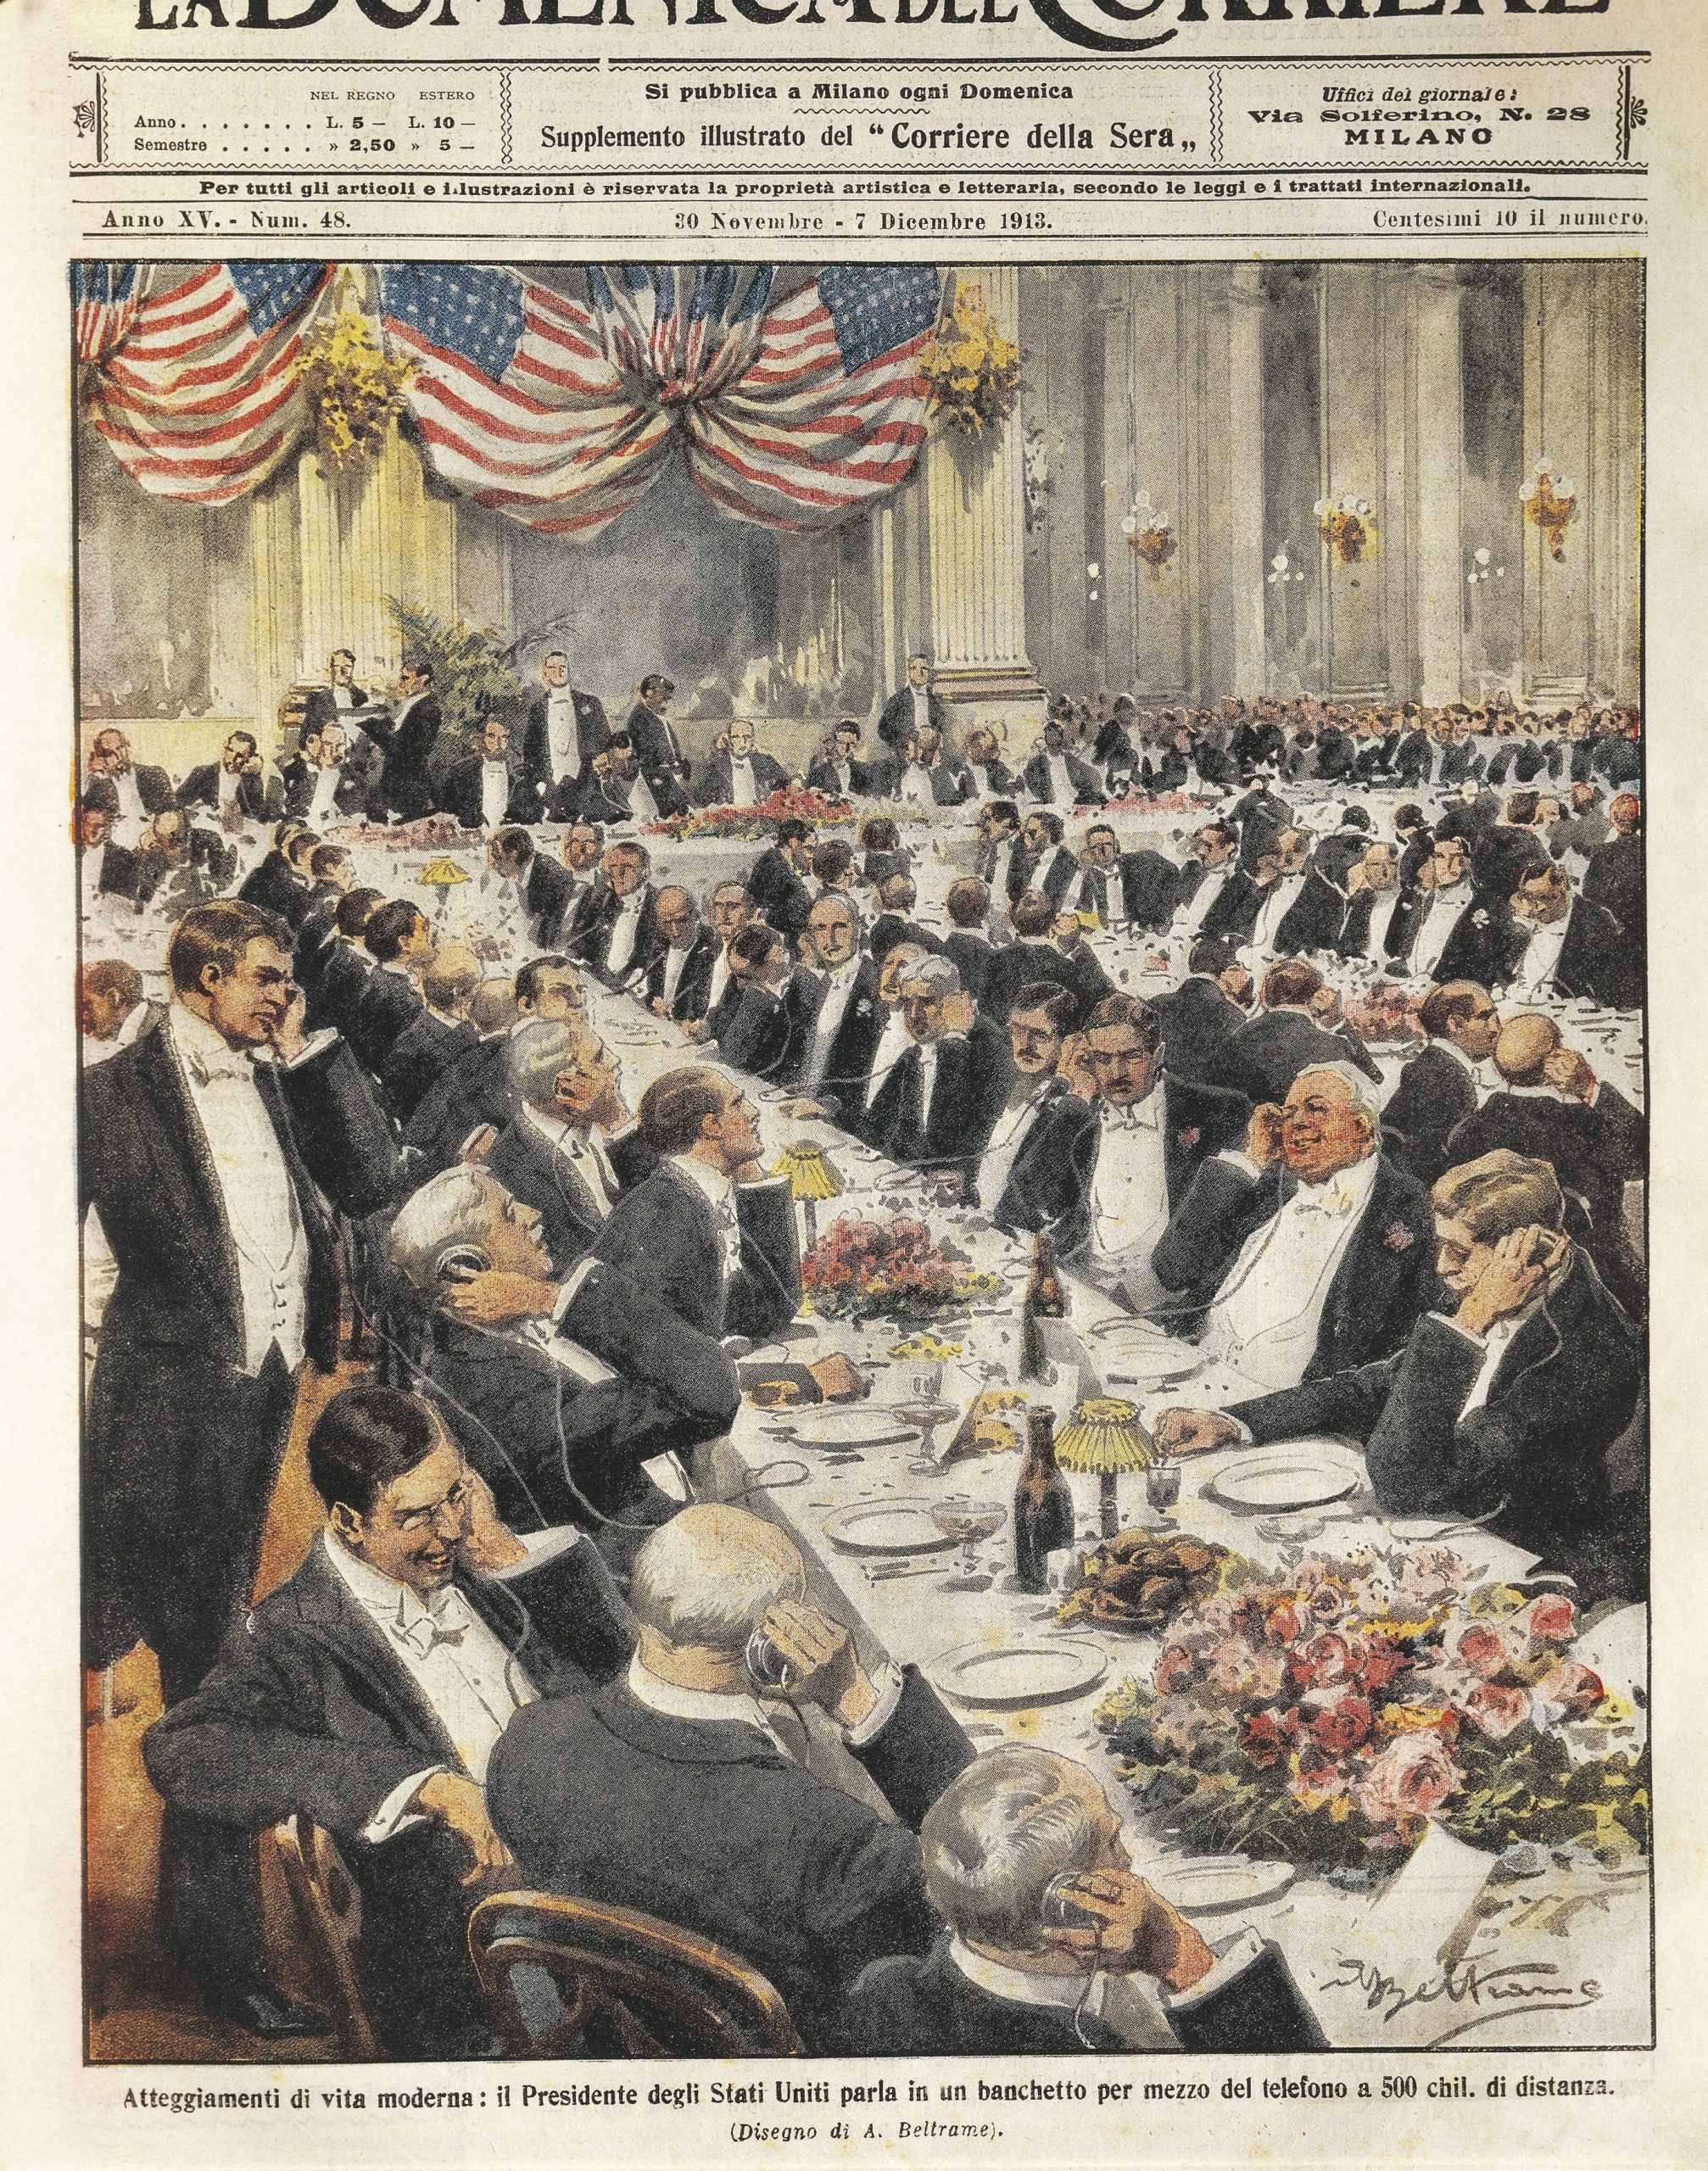 The President of the United States speaking by telephone at a distance of 500 kilometres. Illustration by Achille Beltrame on the Italian newspaper 'La Domenica del Corriere', November 20, 1913